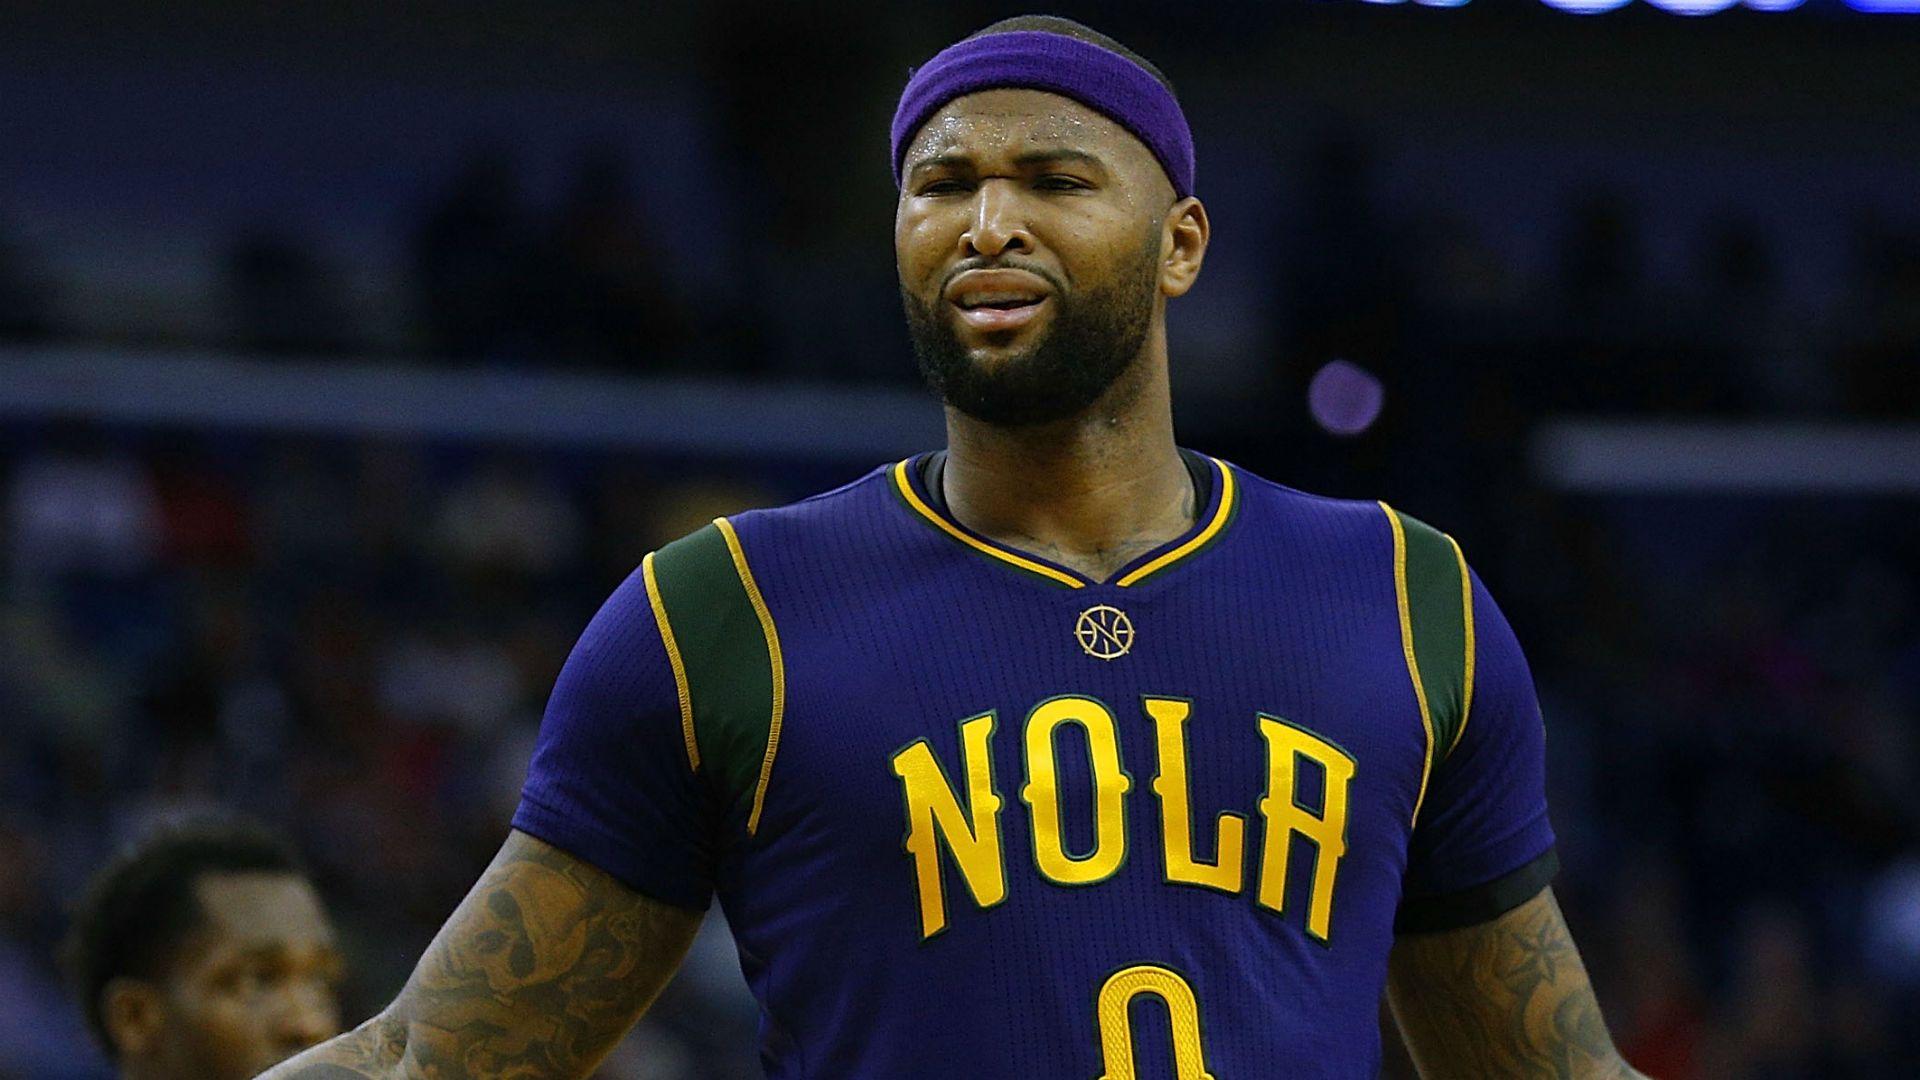 NBA fines DeMarcus Cousins for 'inappropriate language' toward fan